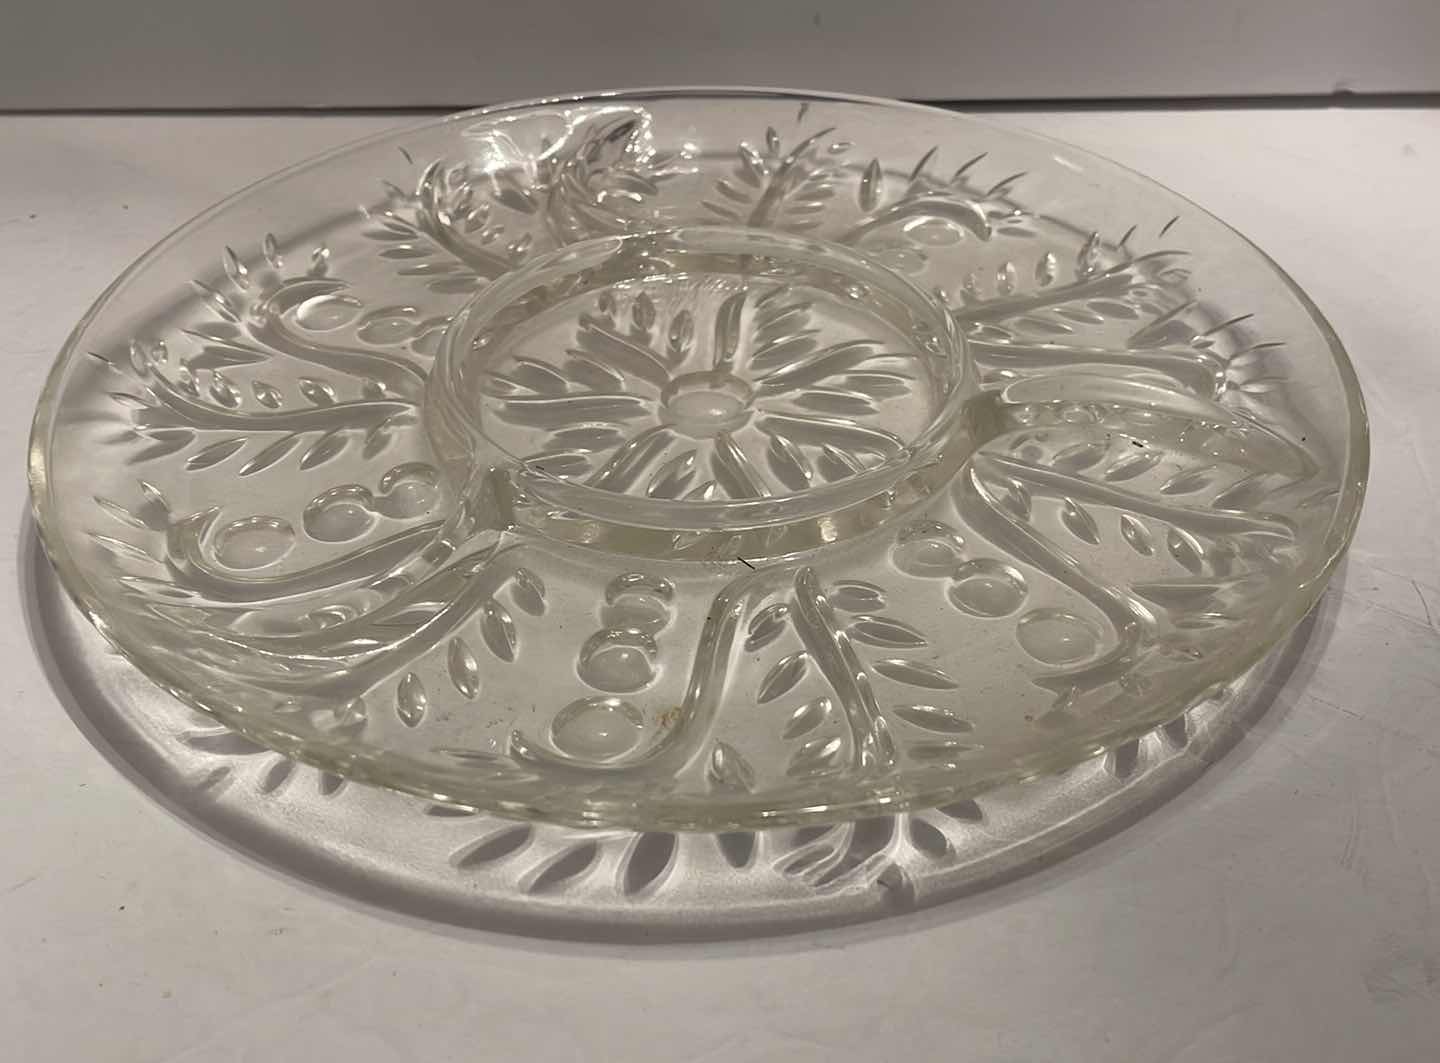 Photo 3 of ONE CRYSTAL GLASS SERVING DISH AND SERVING PLATTER